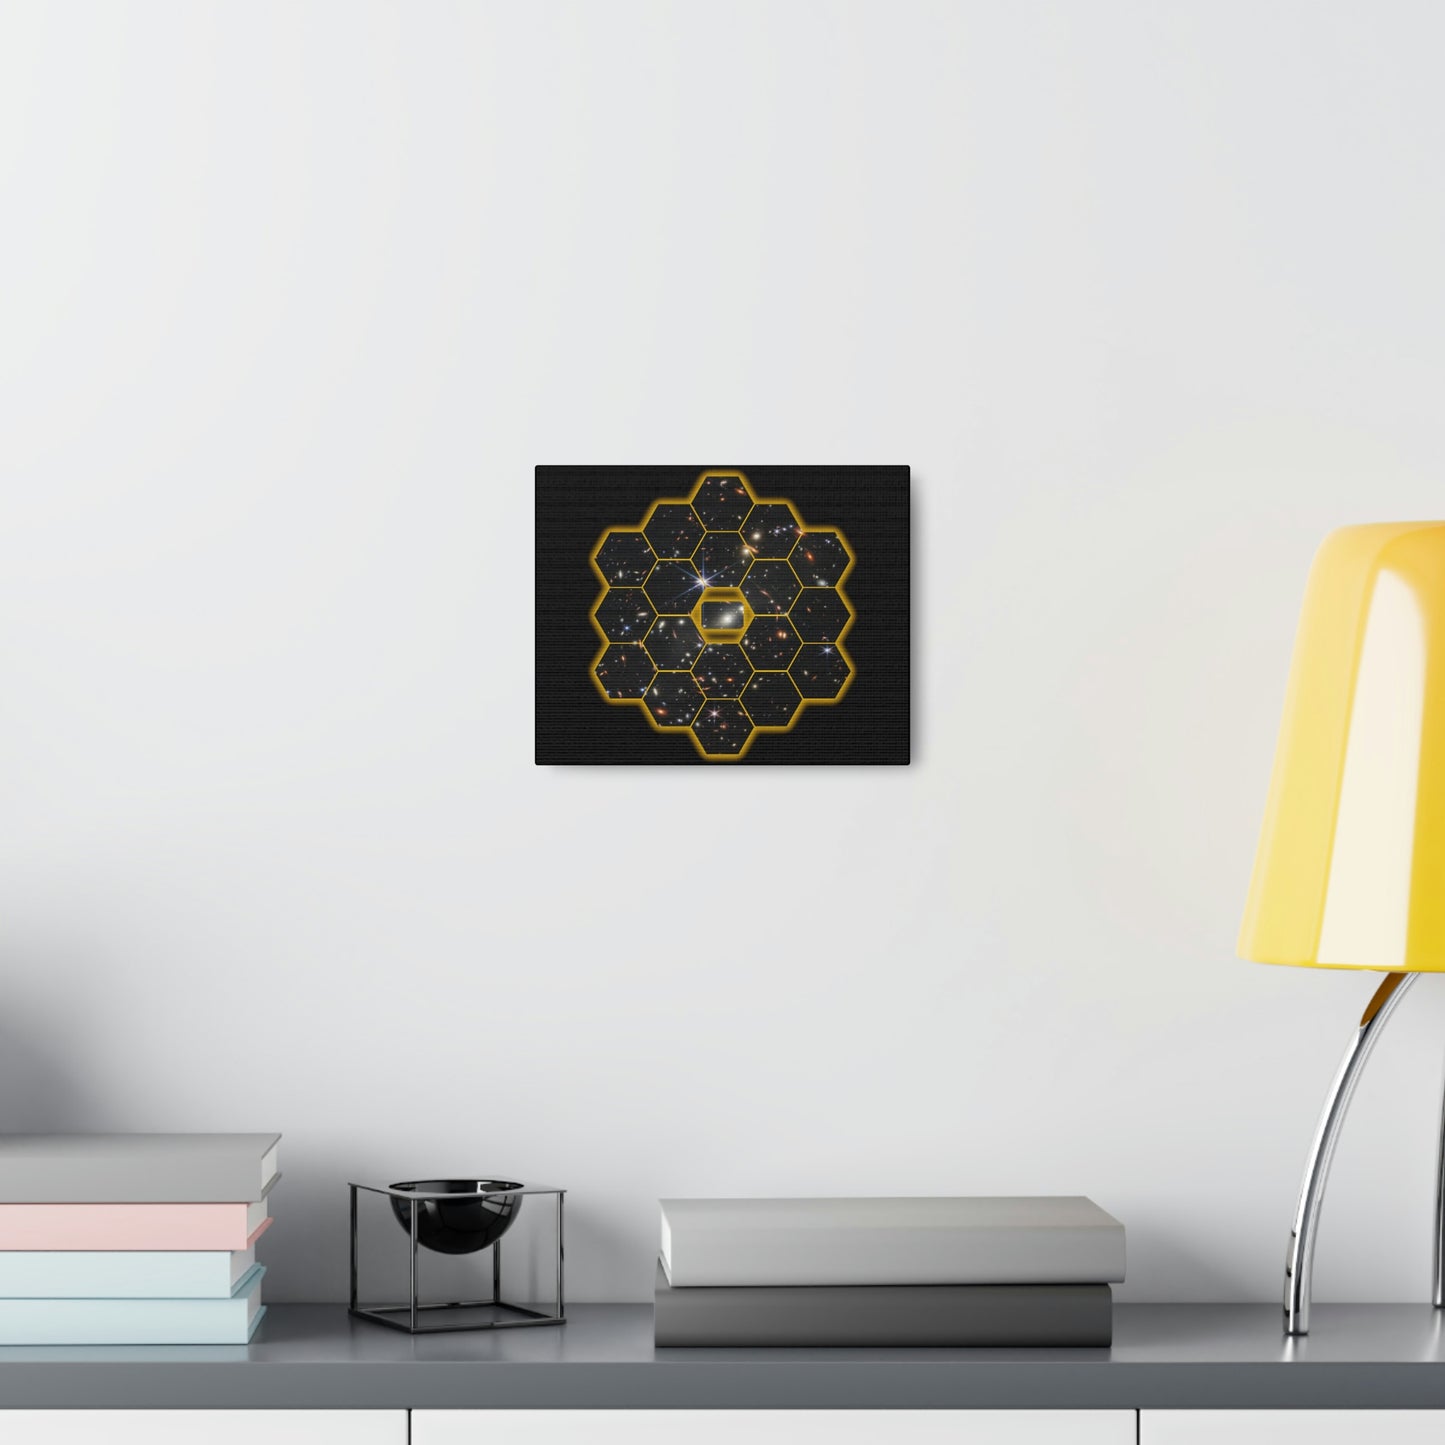 James Webb Telescope Artistic Wall Decore Lord and Lady Towers